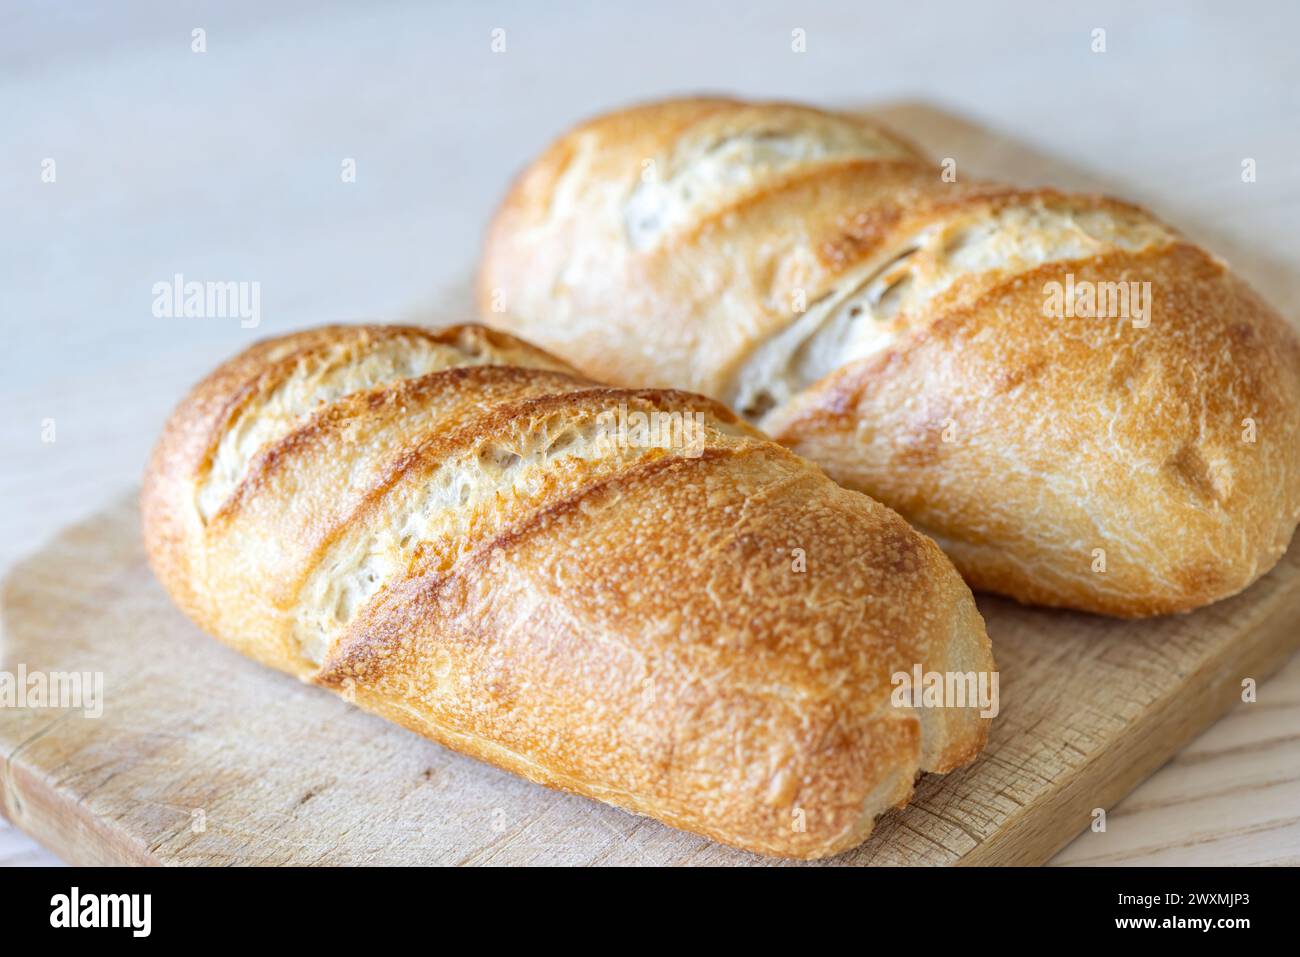 Two crusty golden brown bread loaves on wooden cutting board. Stock Photo